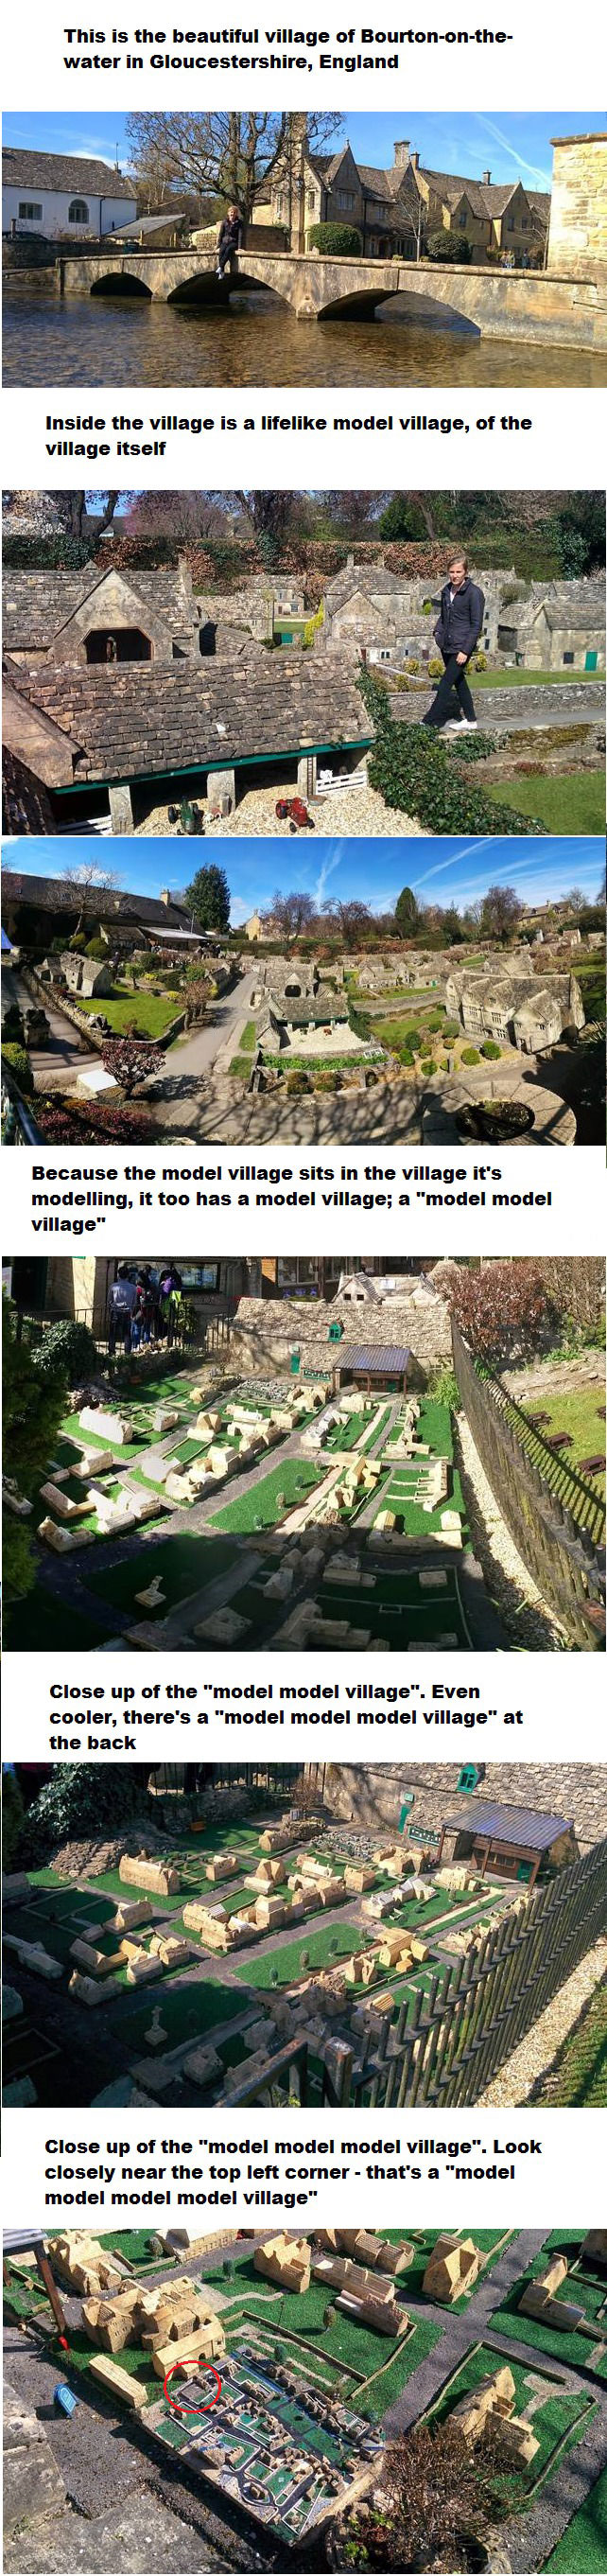 the village with a model model model village of itself, bourbon-on-the-water, gloucestershire england